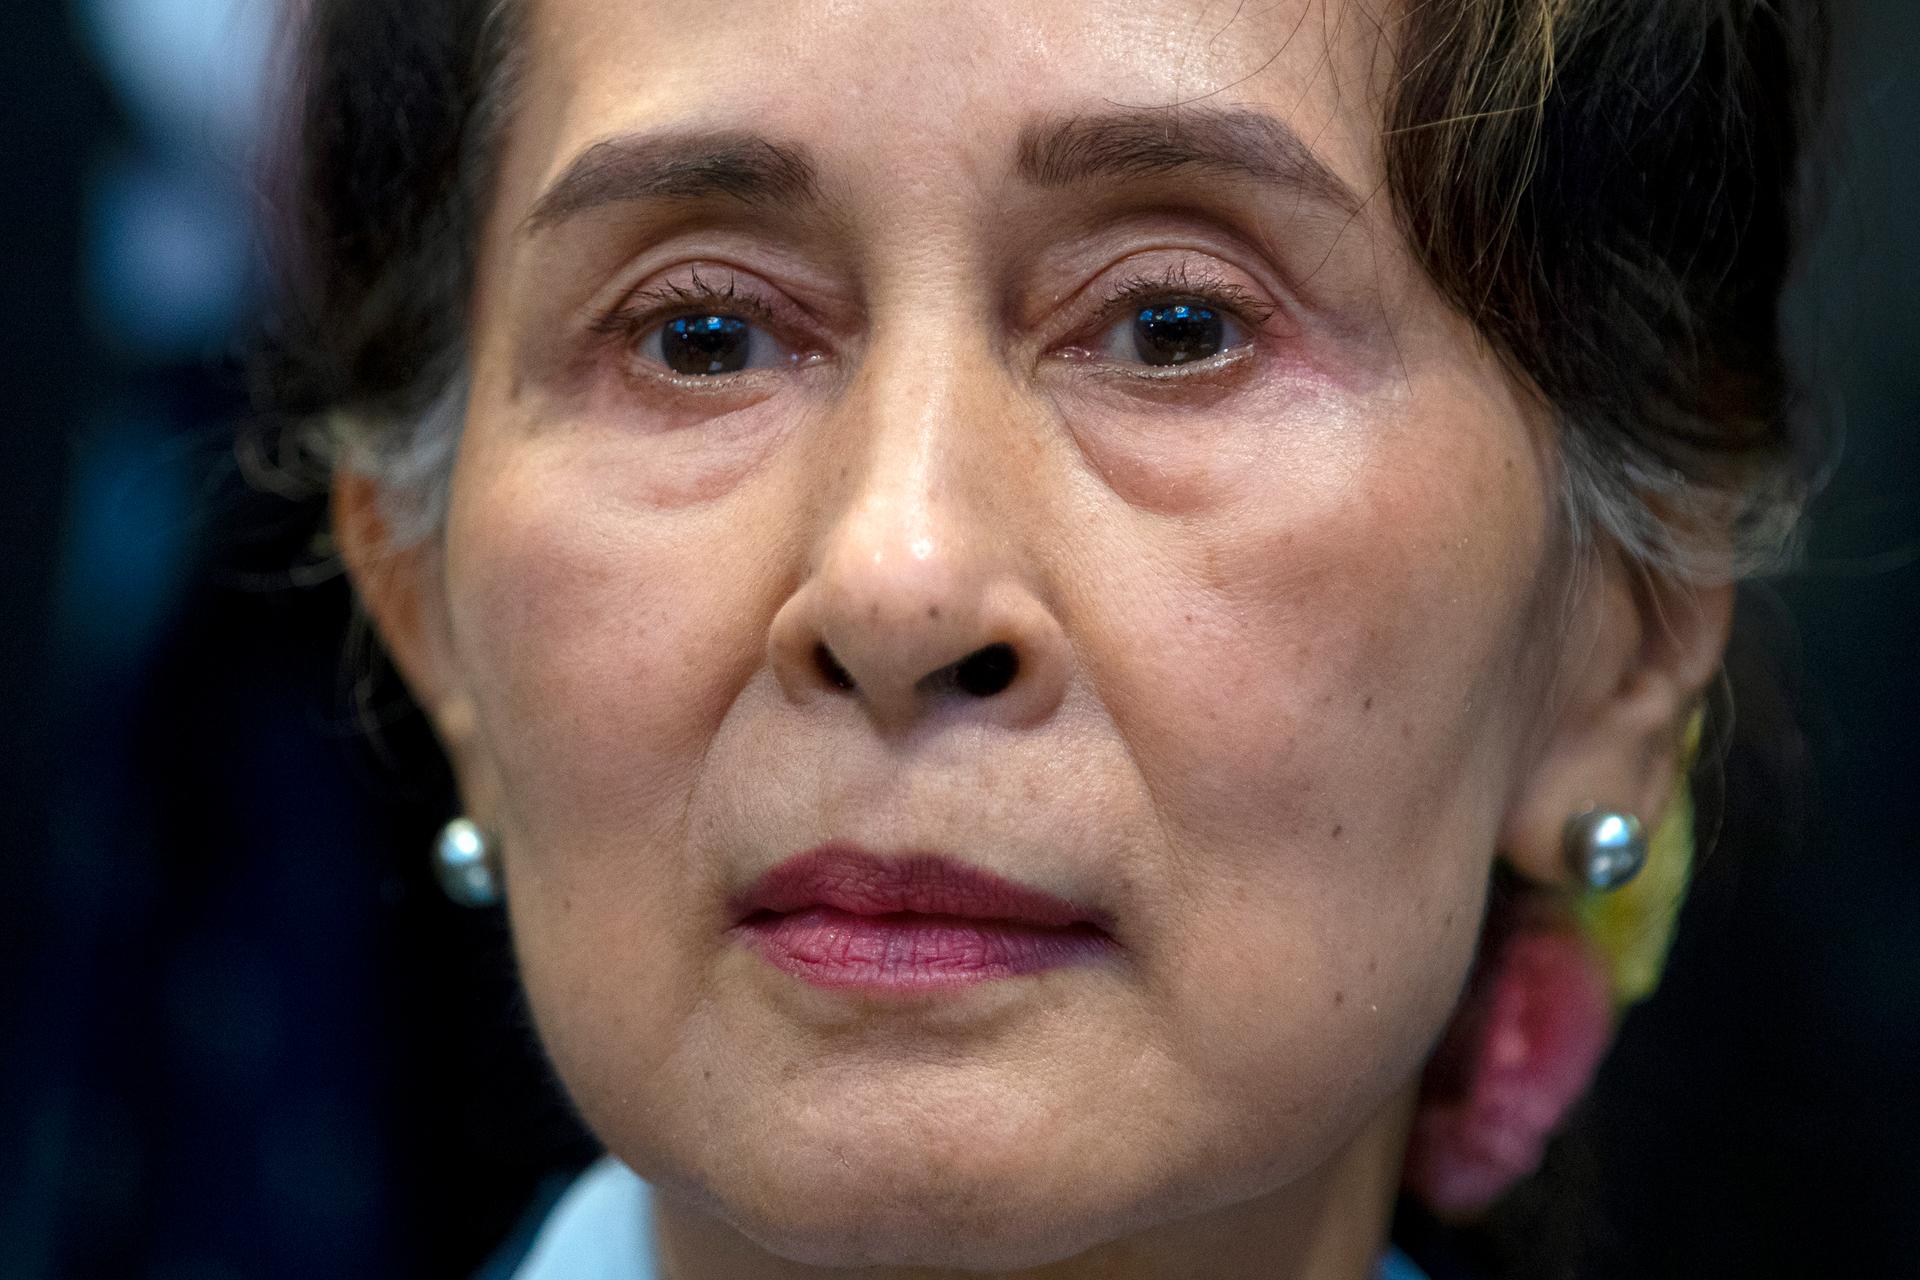 Myanmar's leader, Aung San Suu Kyi, waits to address judges of the International Court of Justice in The Hague, Netherlands, Dec. 11, 2019.